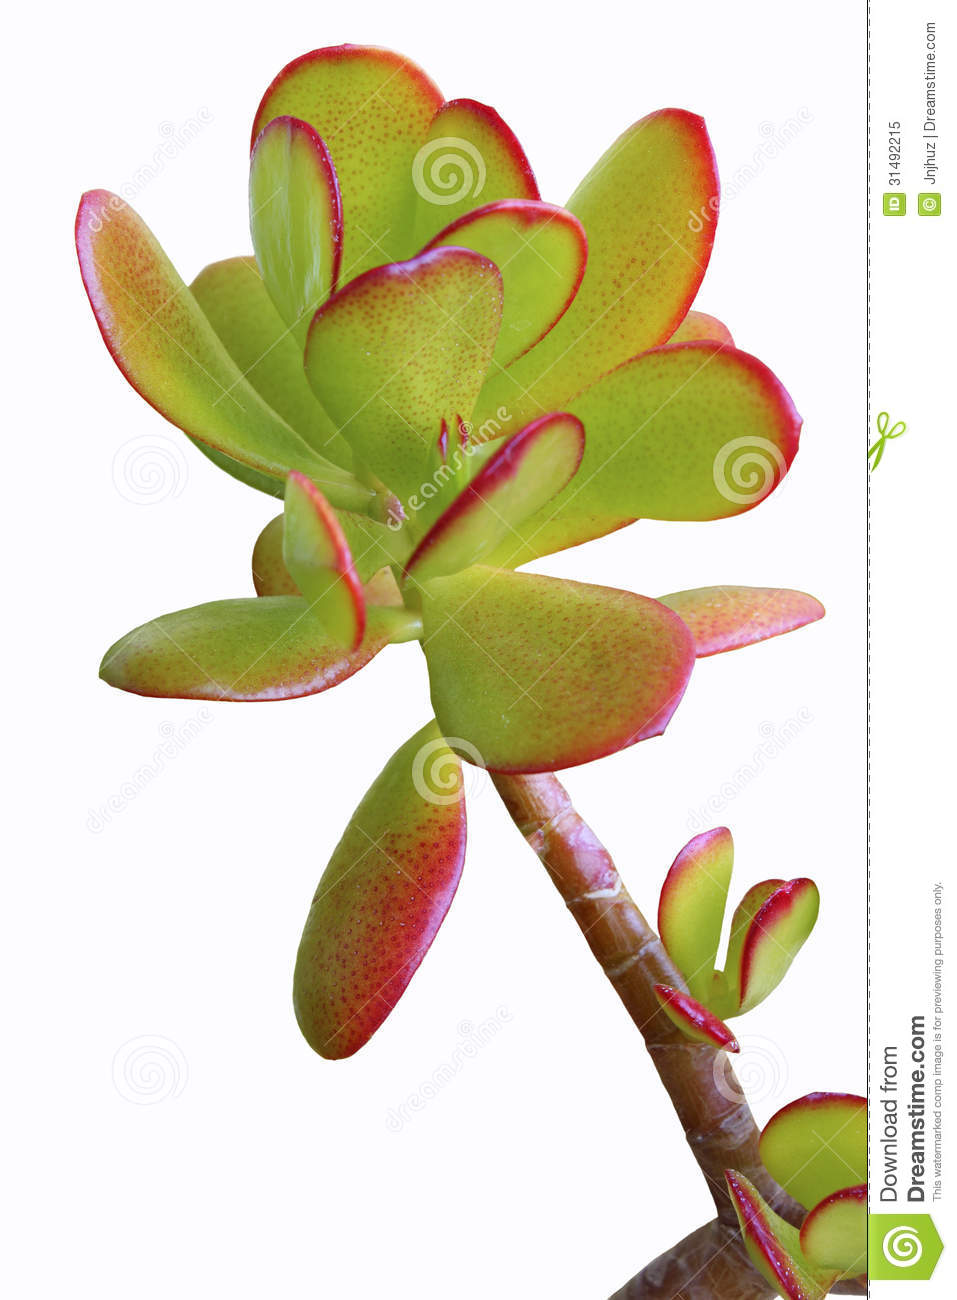 Jade Plant With Red Tips Royalty Free Stock Photo   Image  31492215